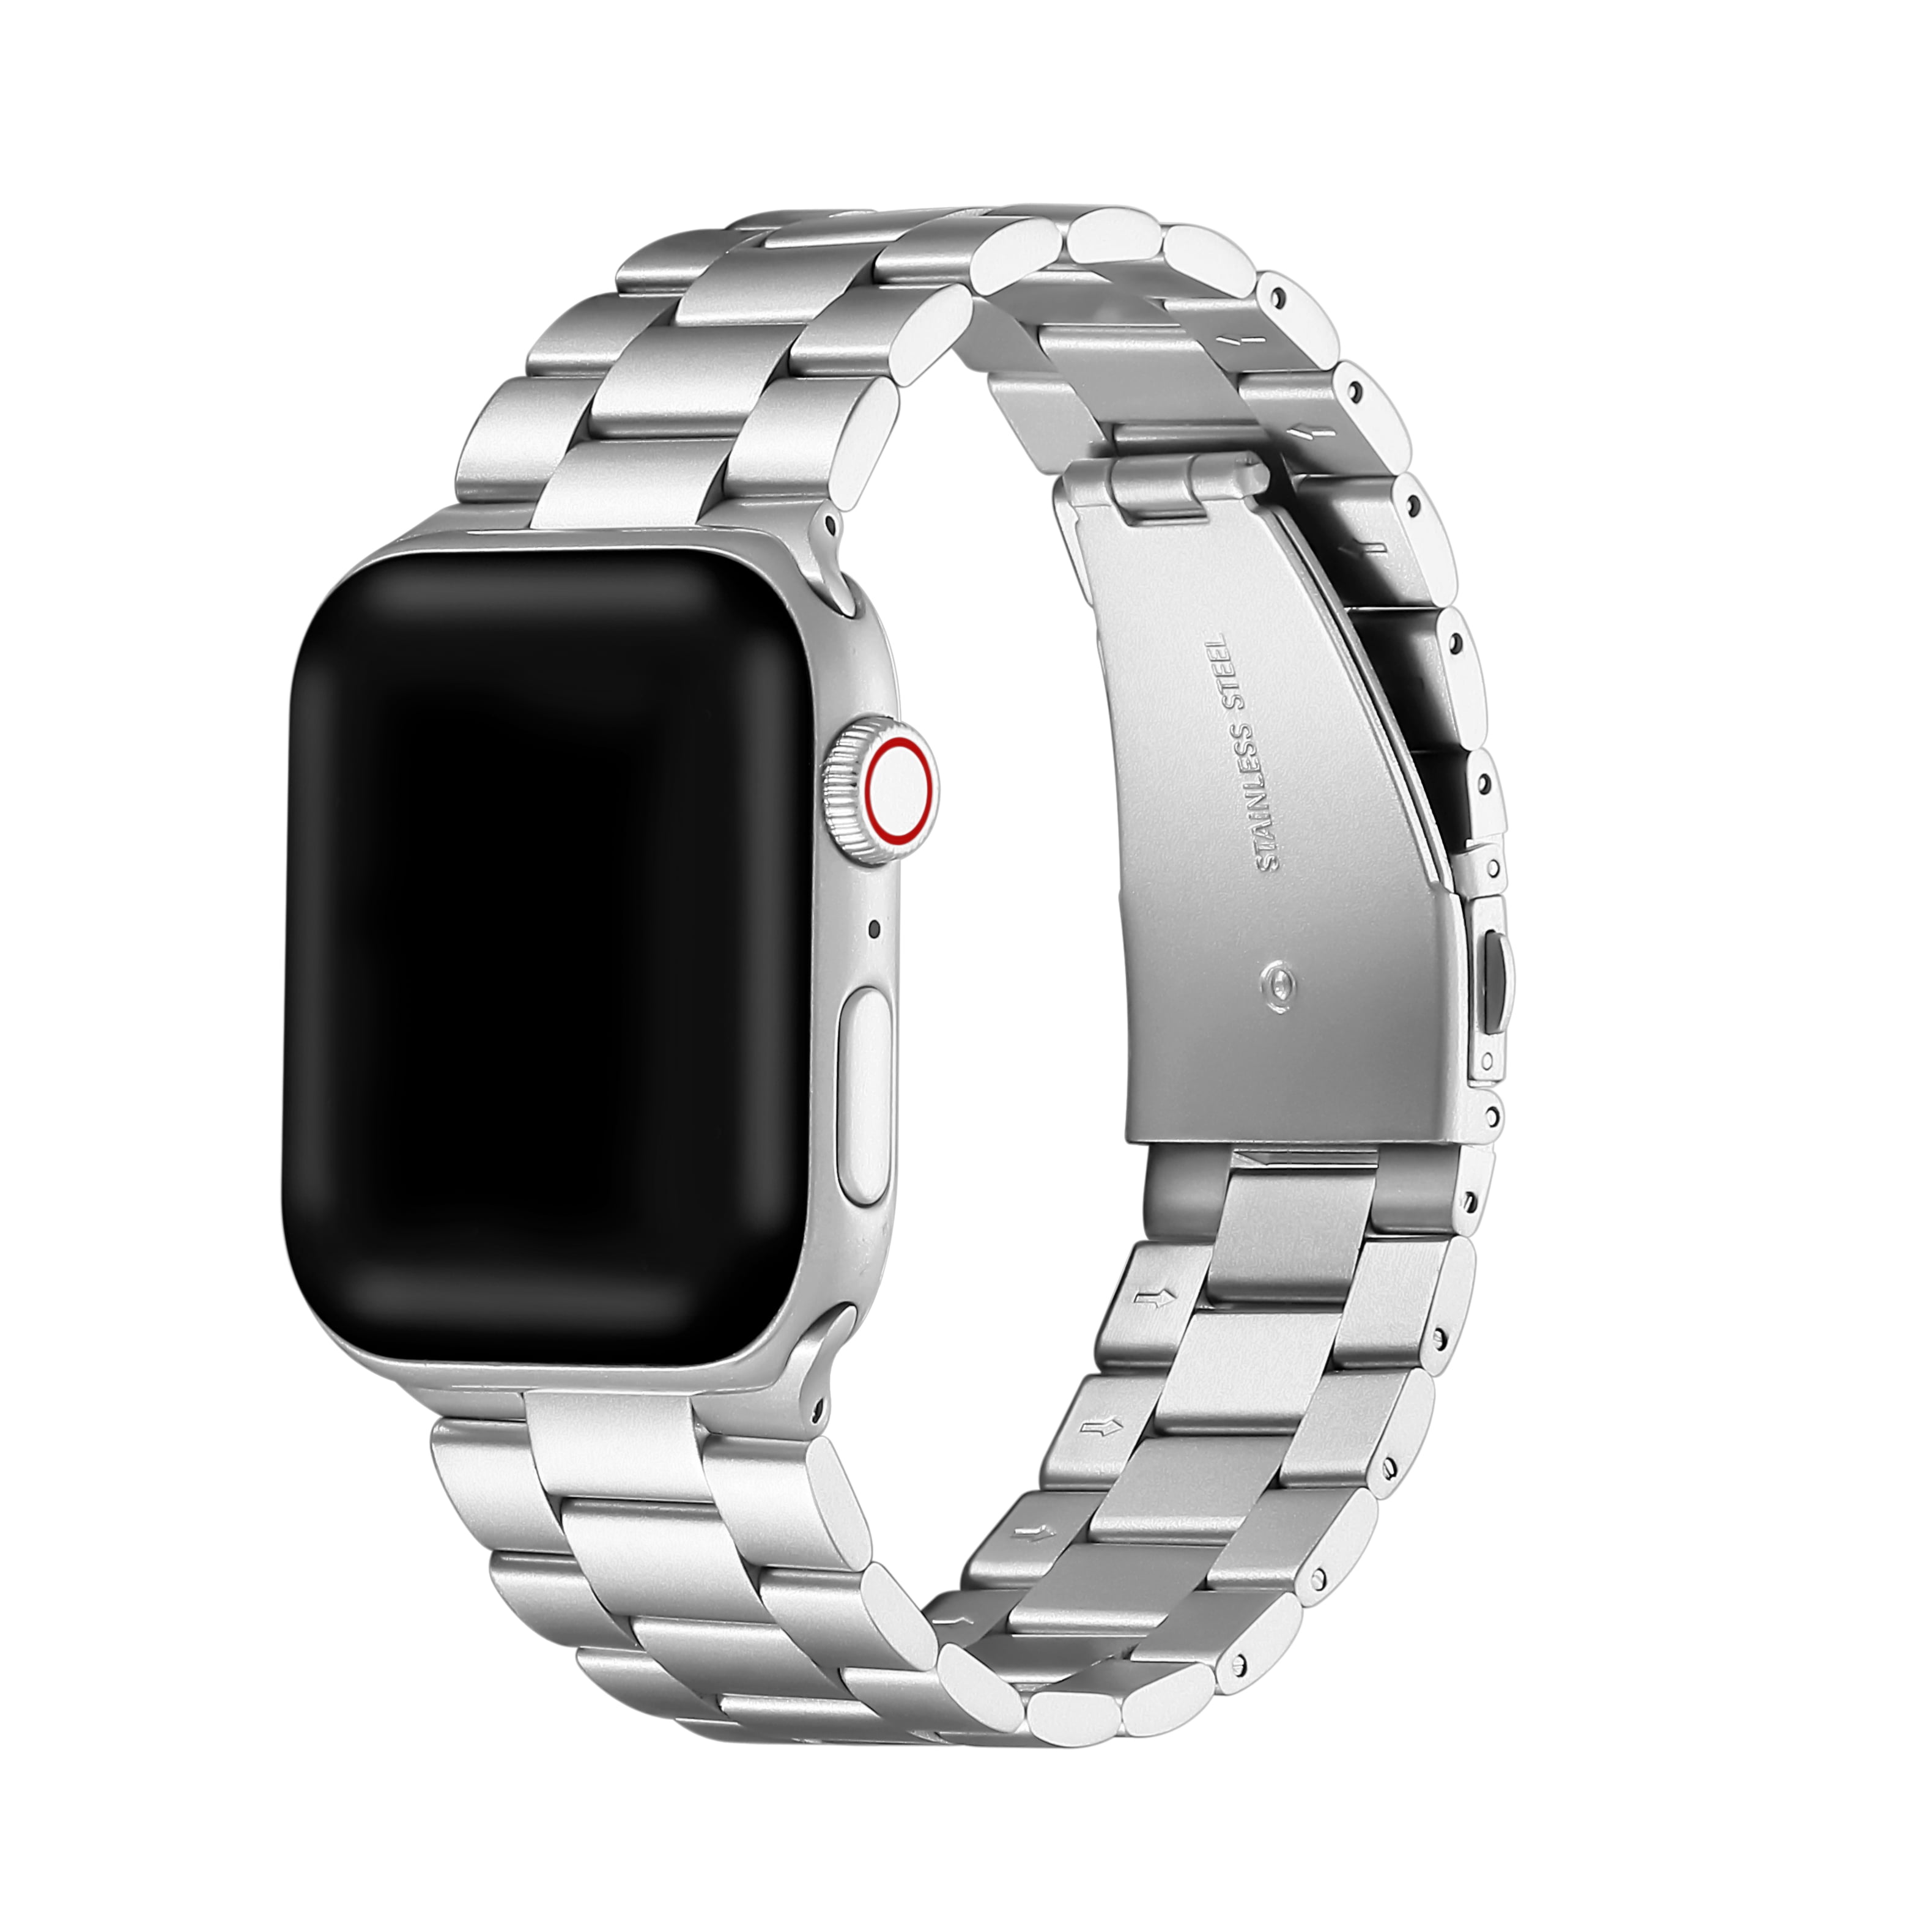 Sloan Silver Premium 3 Link Stainless Steel Band For Apple Watch Series 